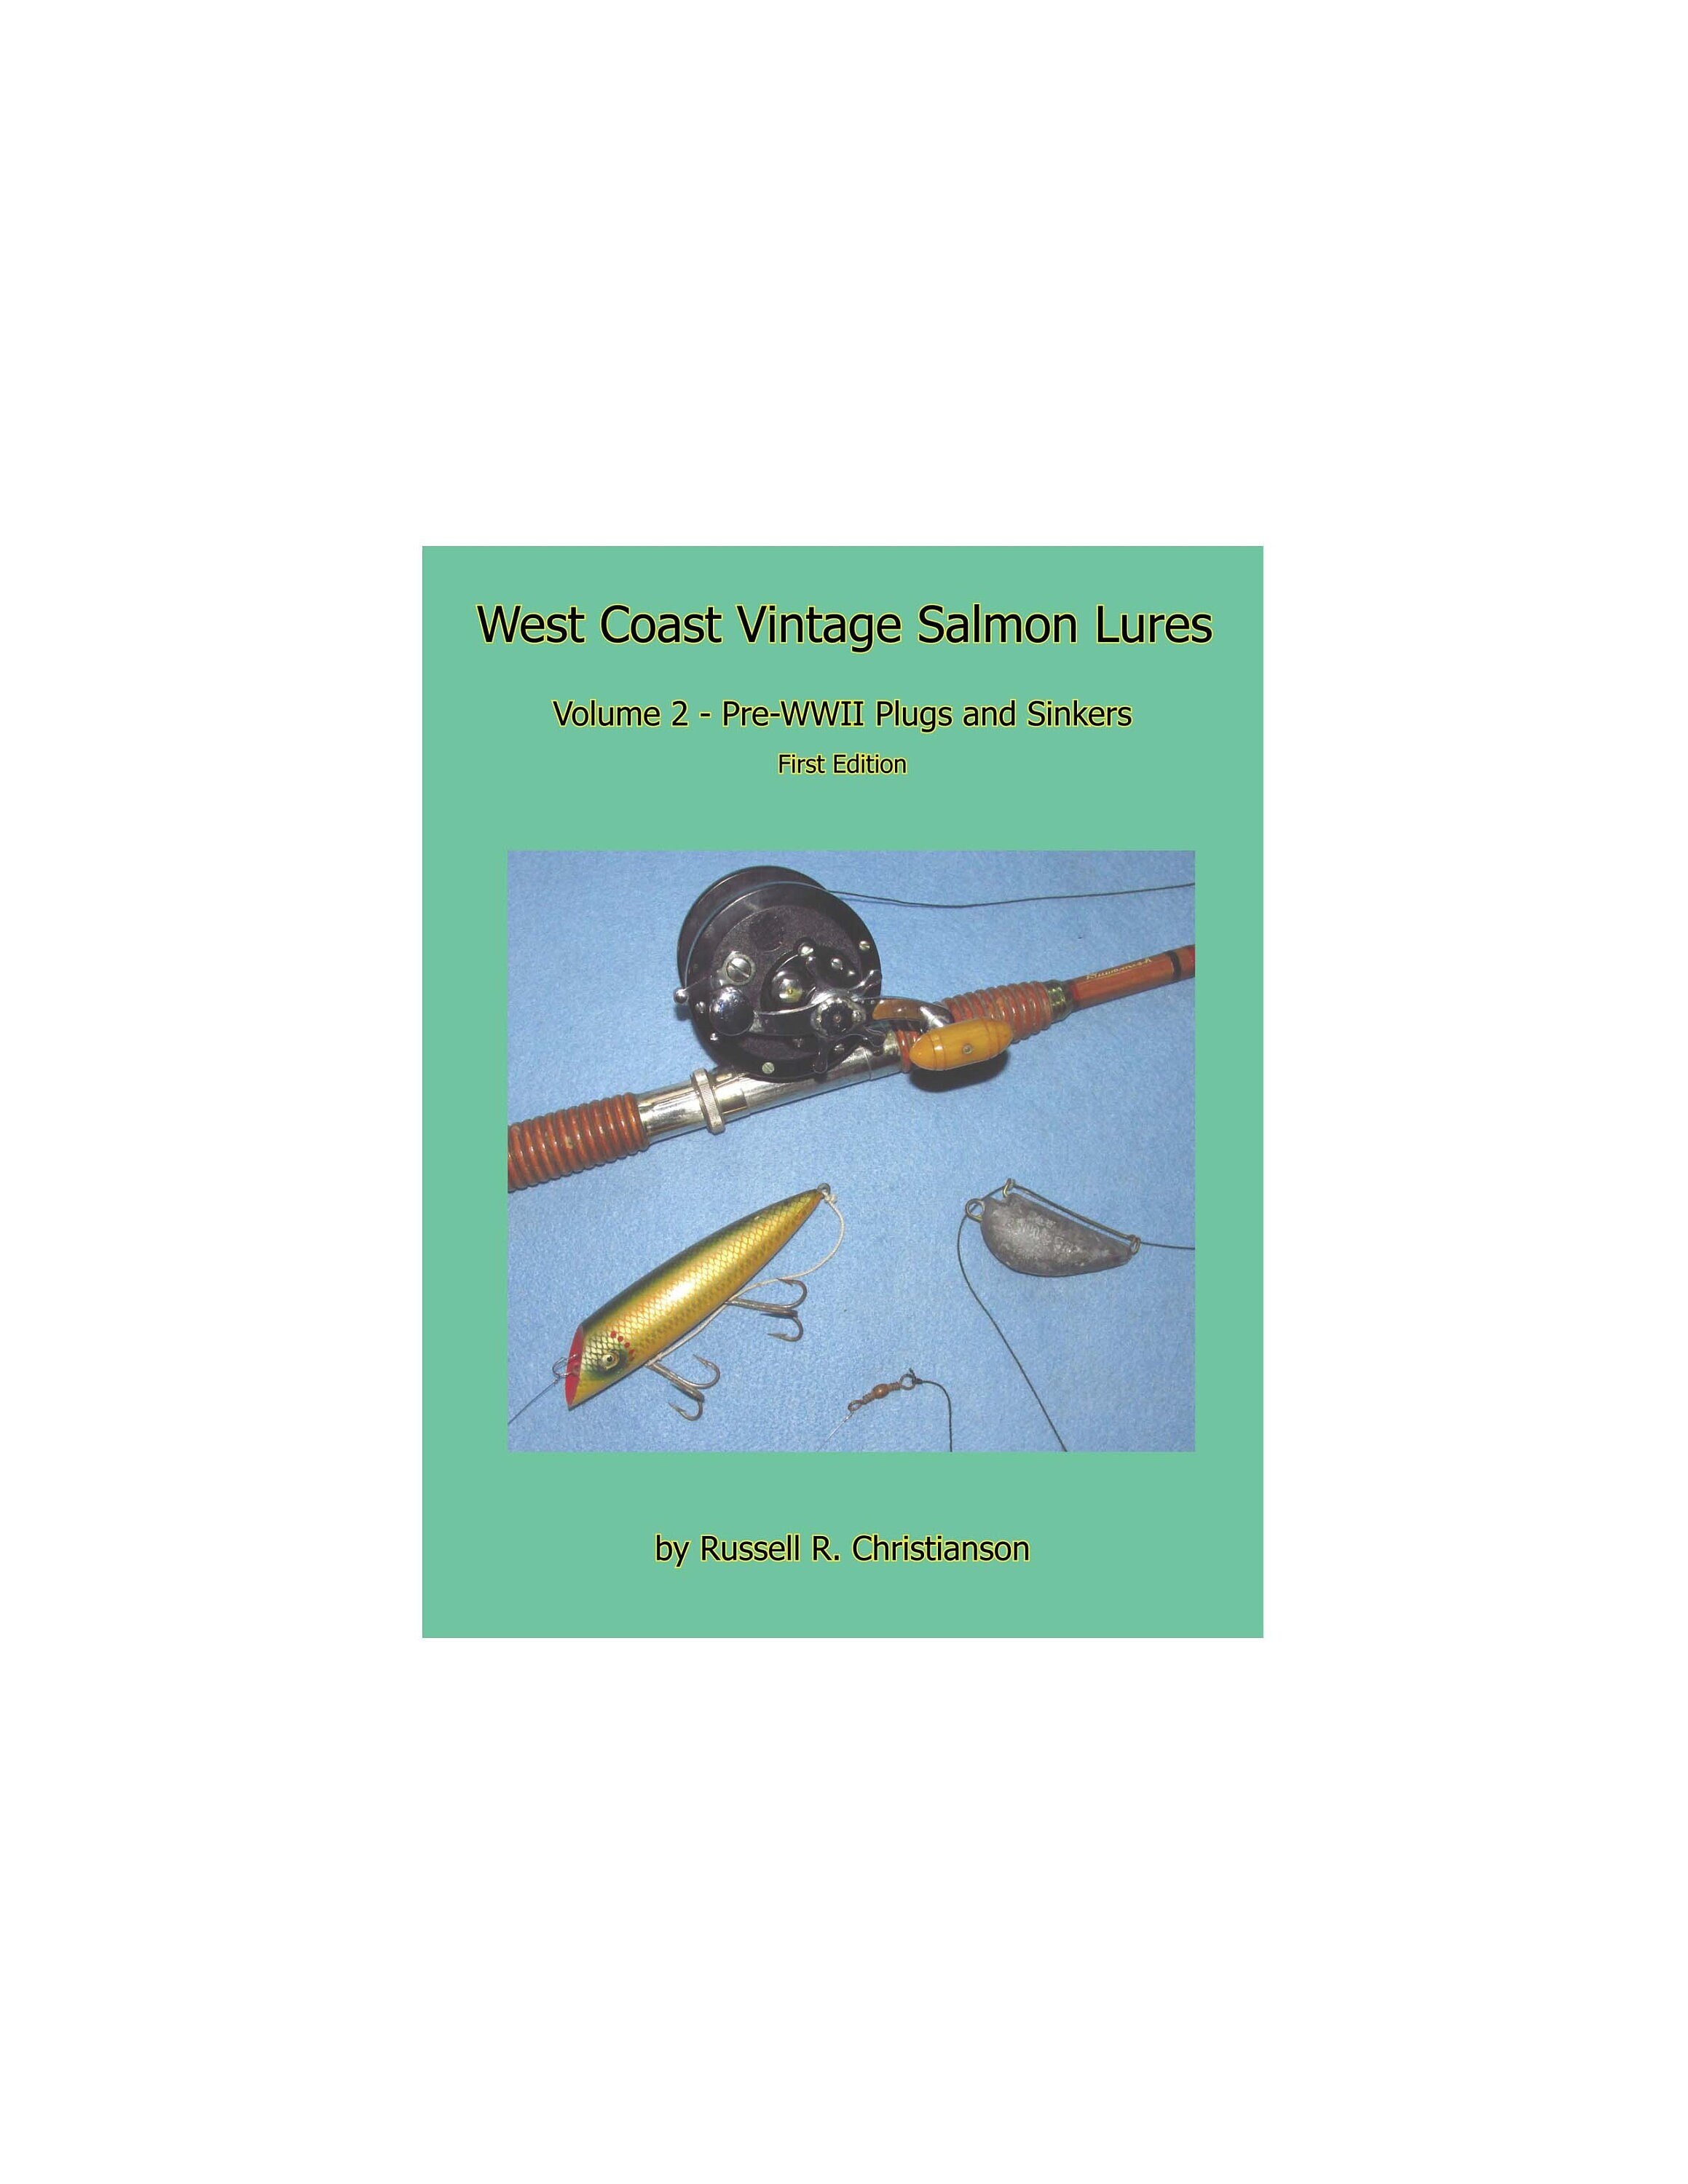 West Coast Vintage Salmon Lures Volume 2 Pre-wwii Plugs and